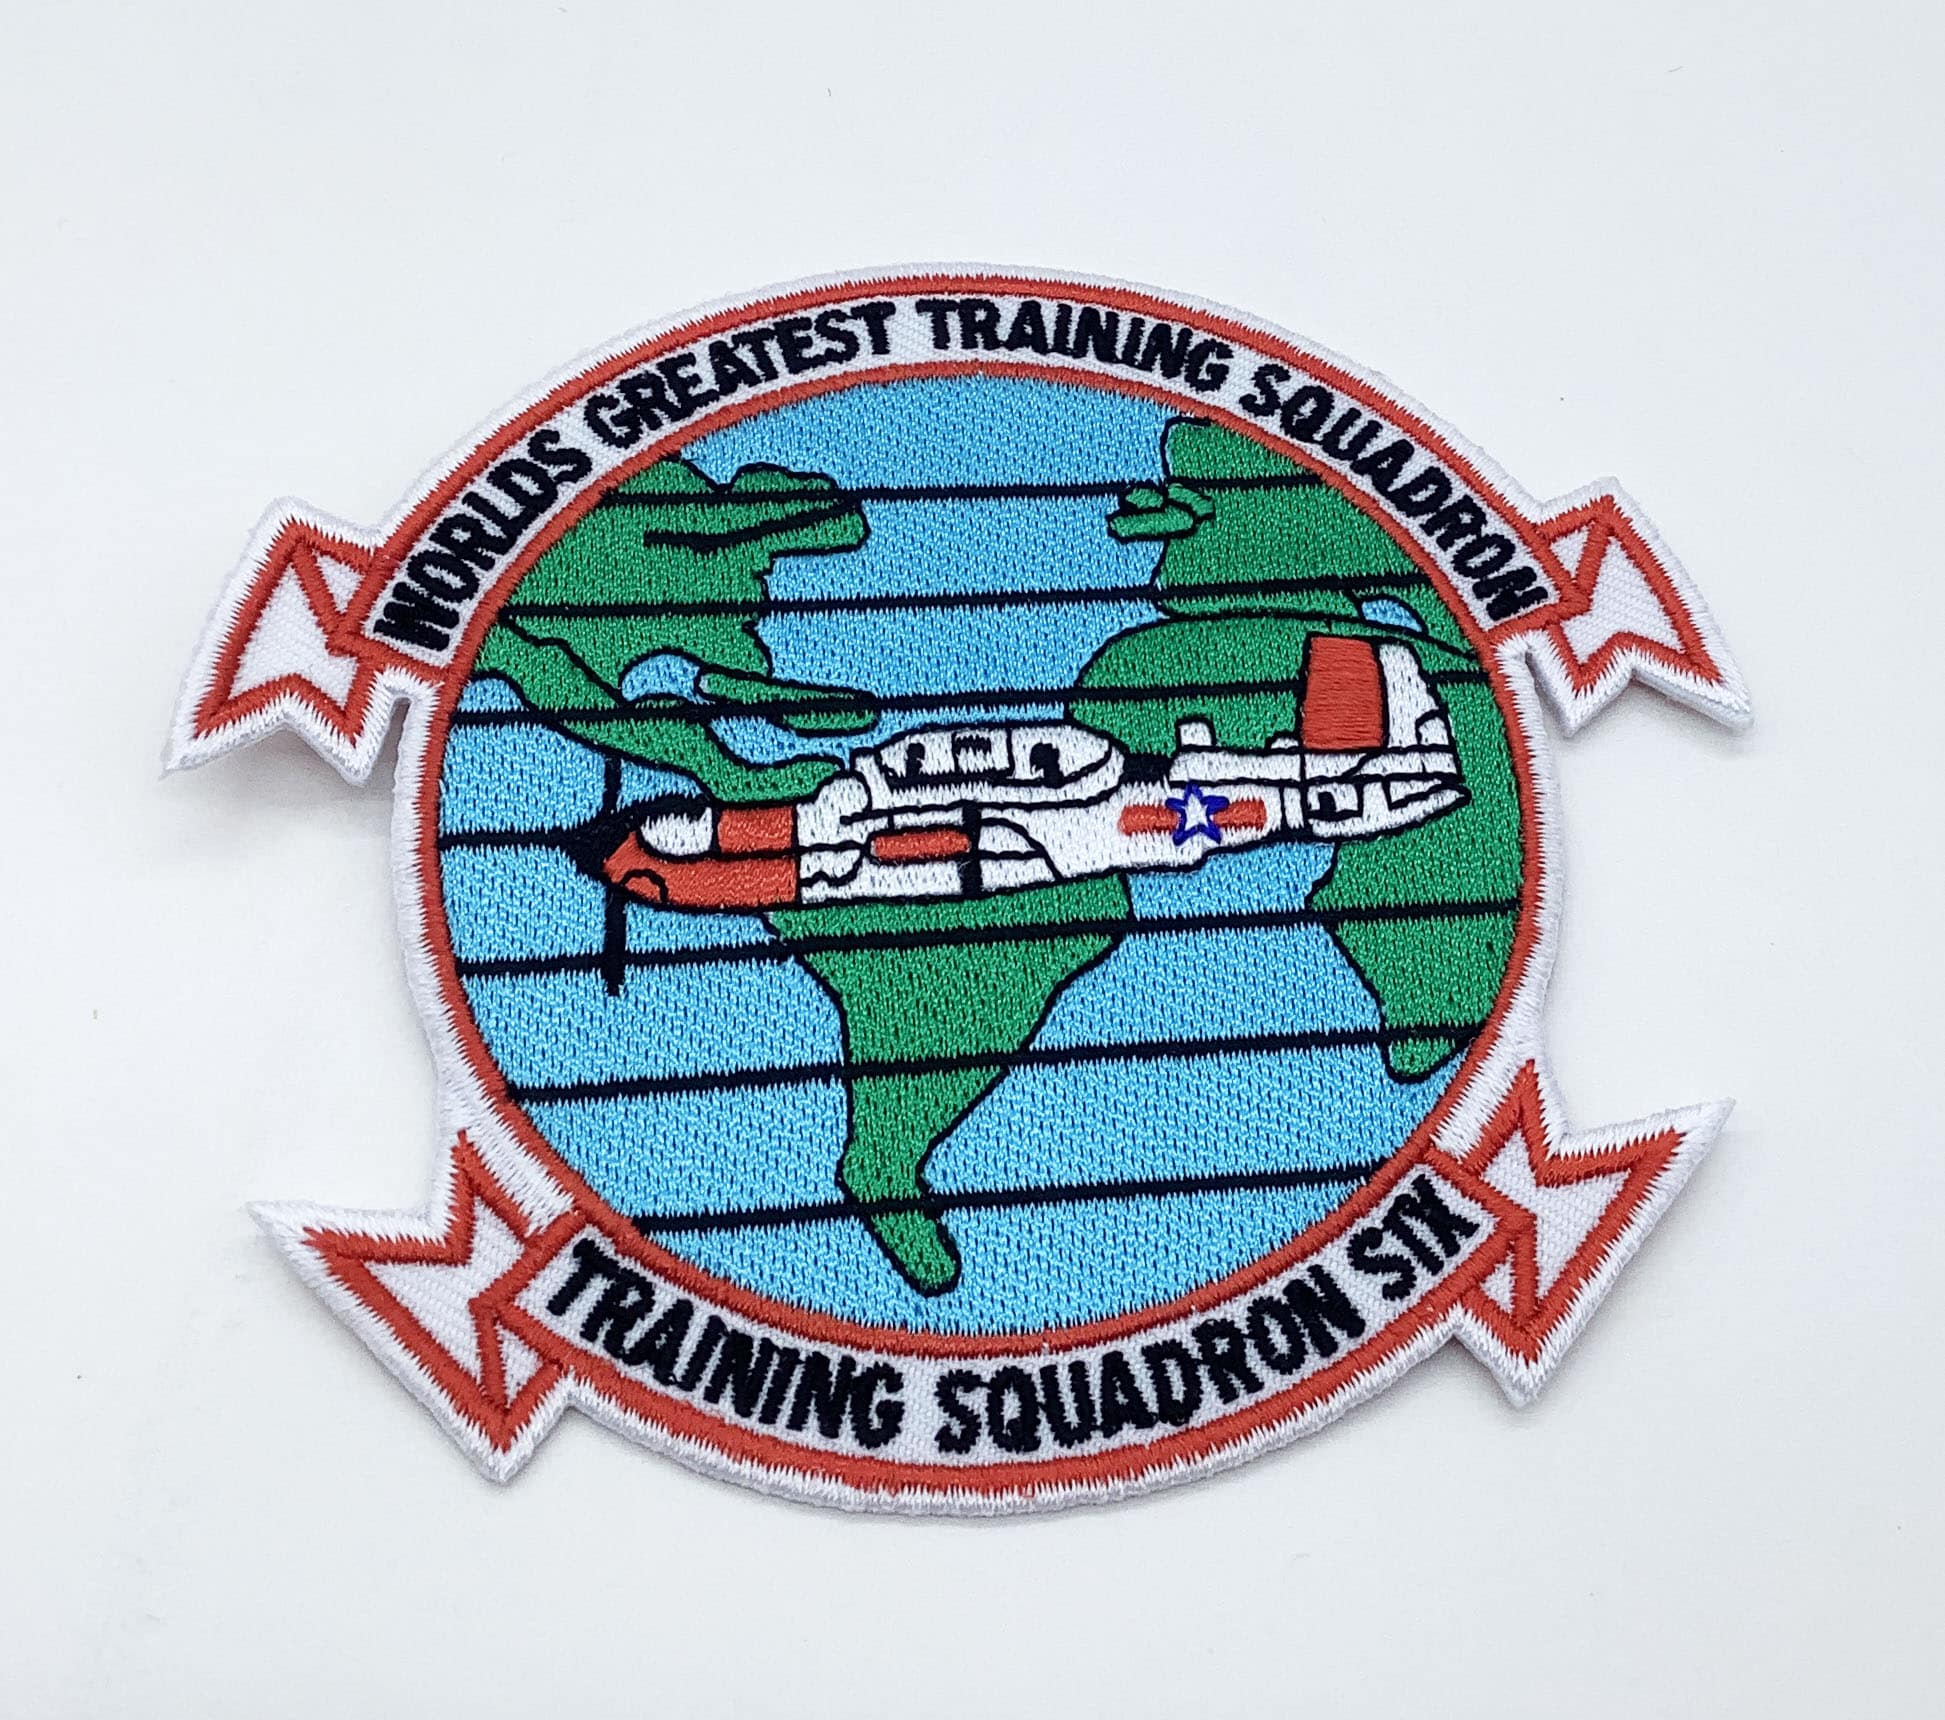 VT-6 Squadron Patch - With Hook and Loop